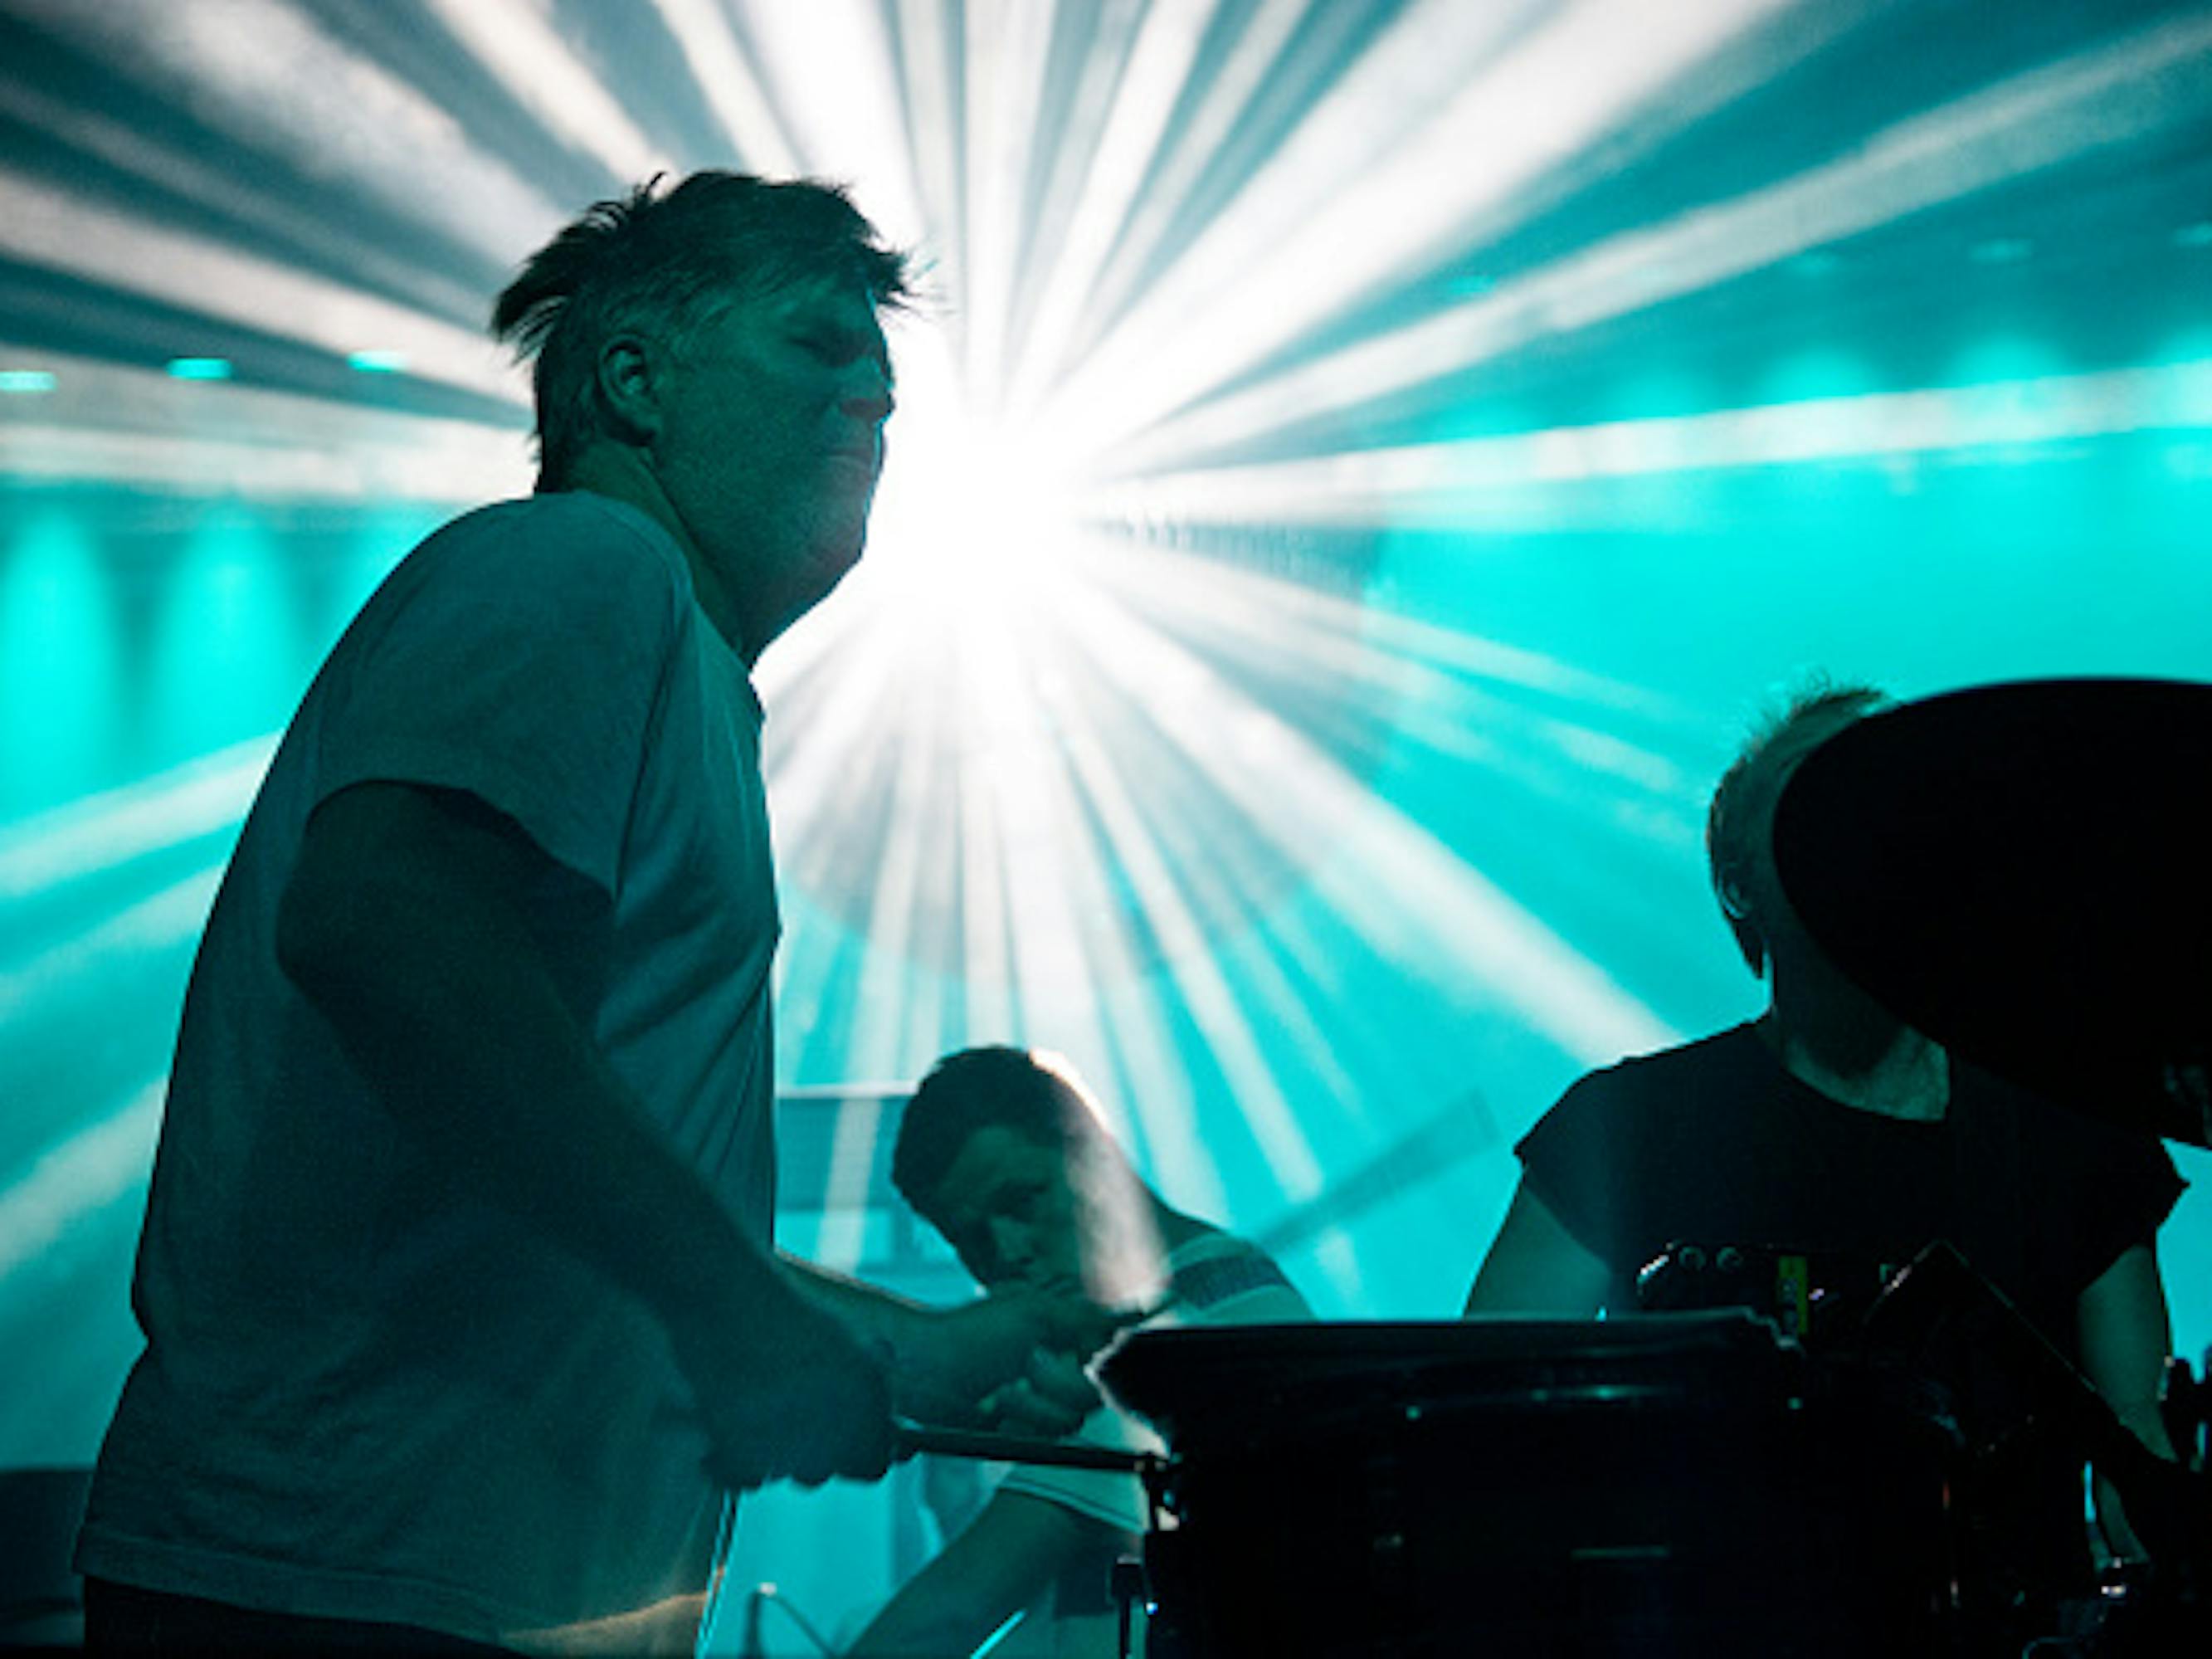 LCD Soundsystem plays the drums against a bright light.